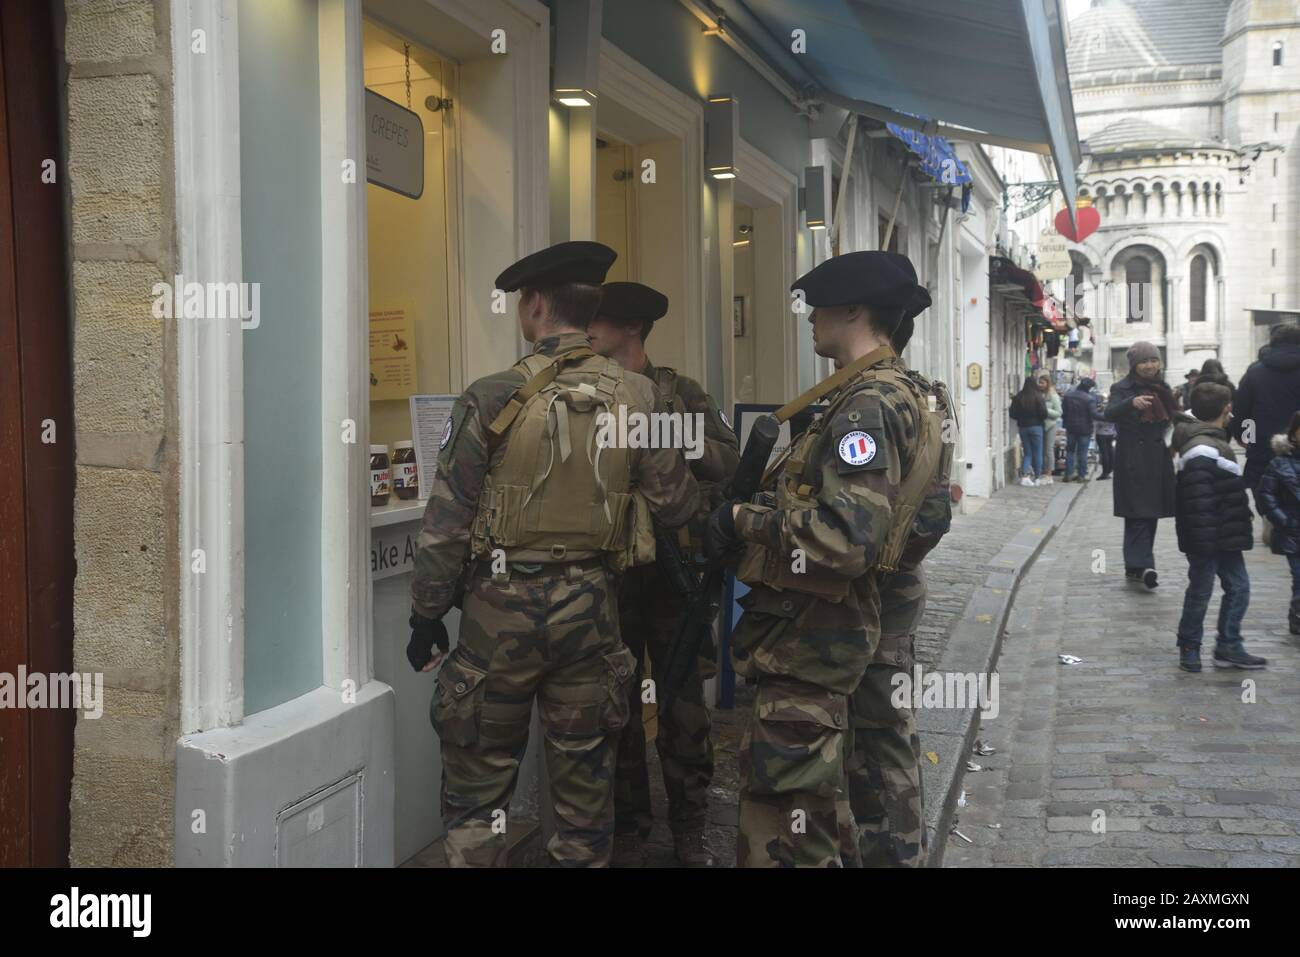 French soldiers hungrily eyeing crepes in Paris, pasakdek Stock Photo